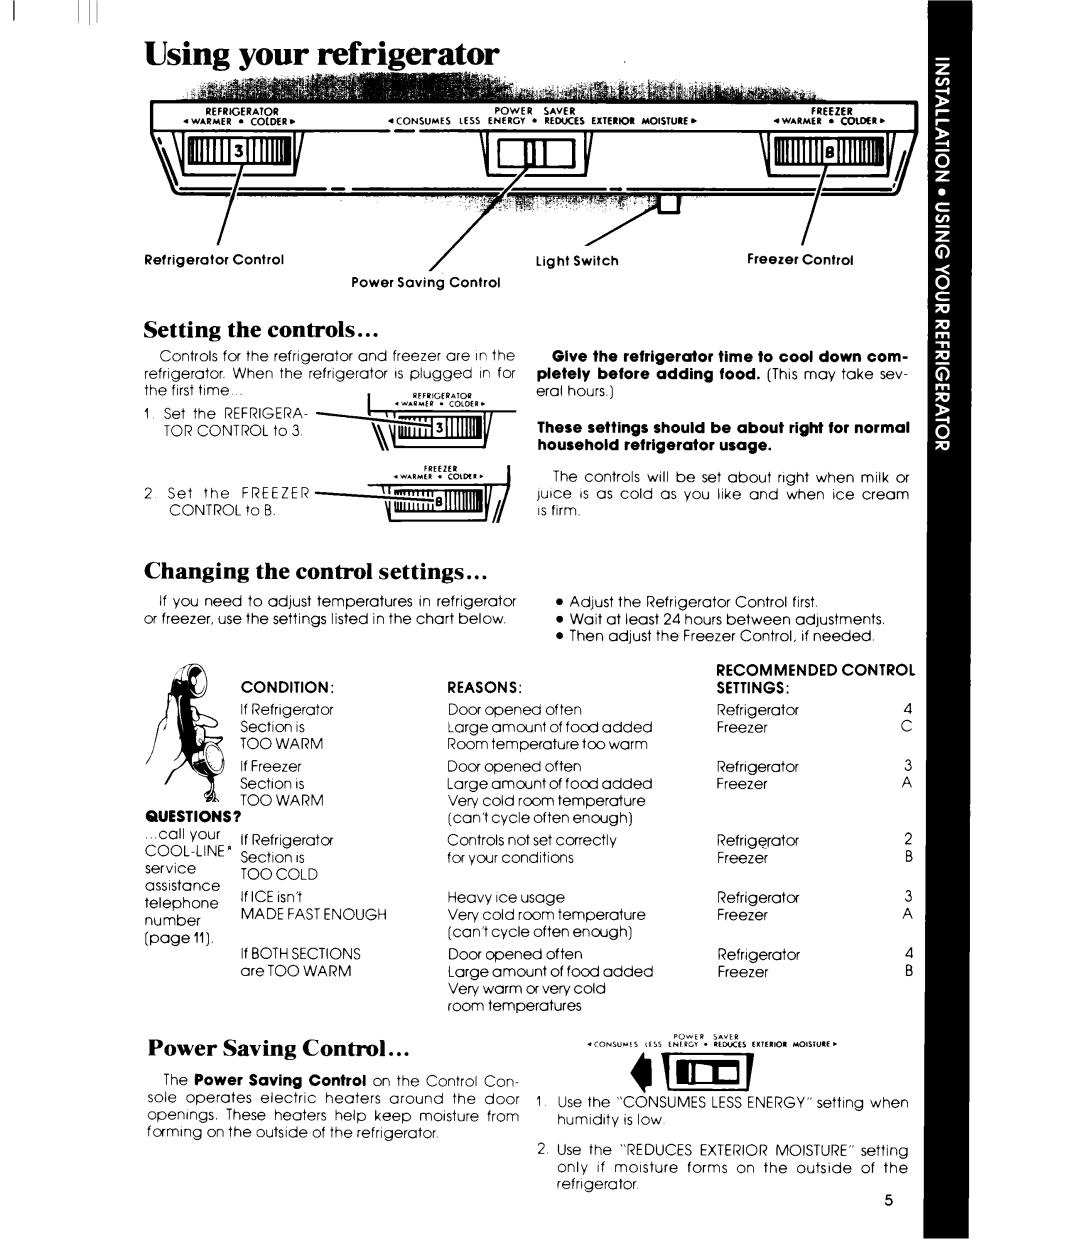 Whirlpool ETl8SC manual Using your refrigerator, Setting the controls, Changing the control settings, Power Saving Control 